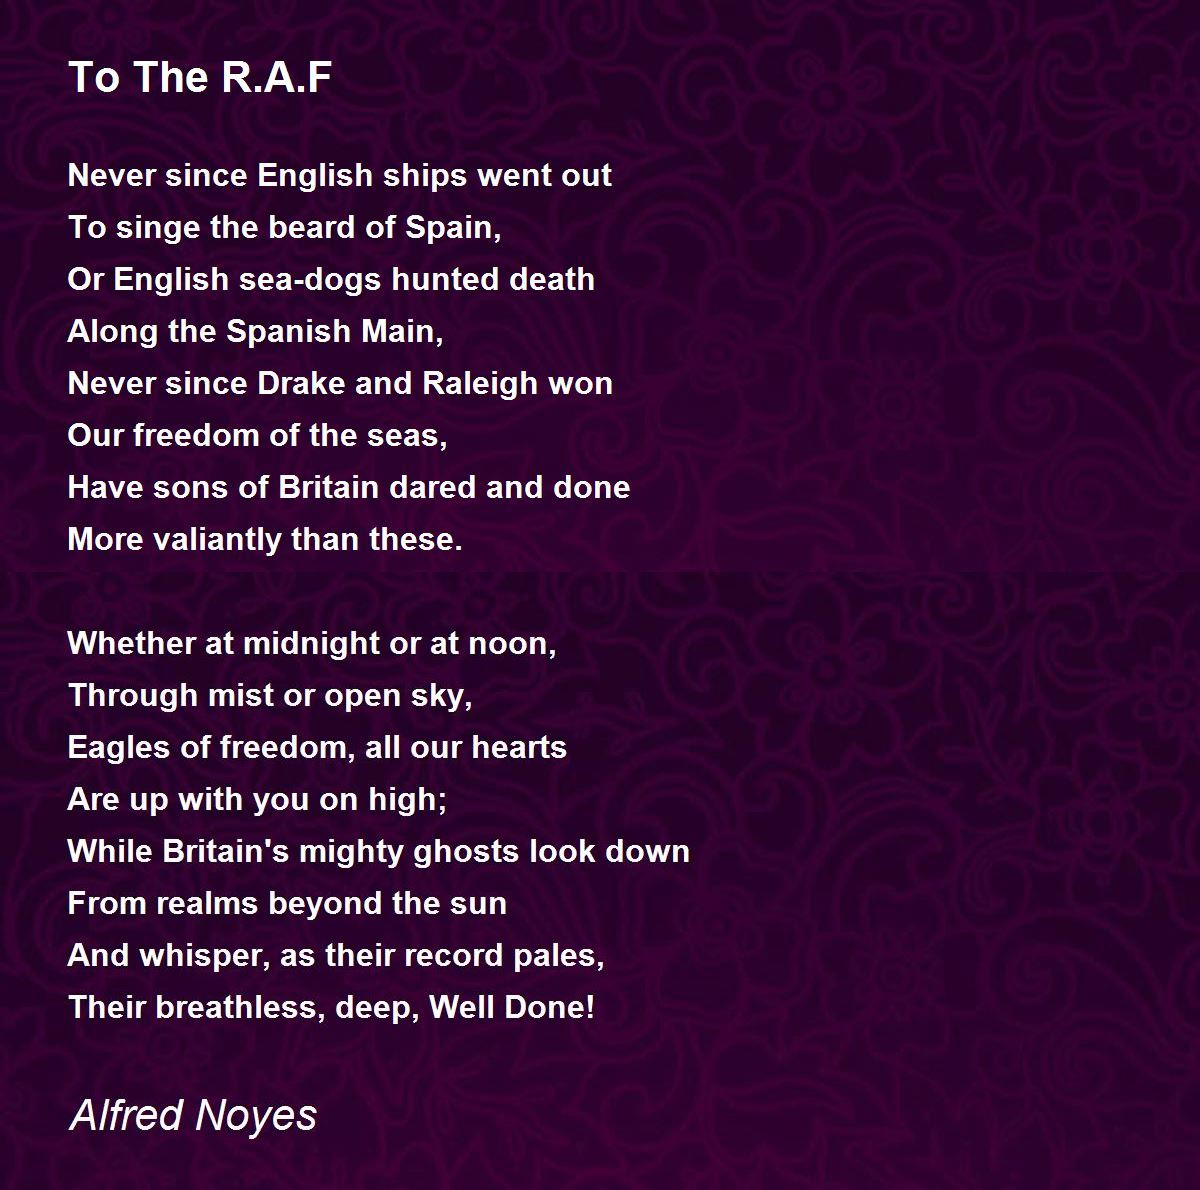 To The R.A.F Poem by Alfred Noyes - Poem Hunter Comments